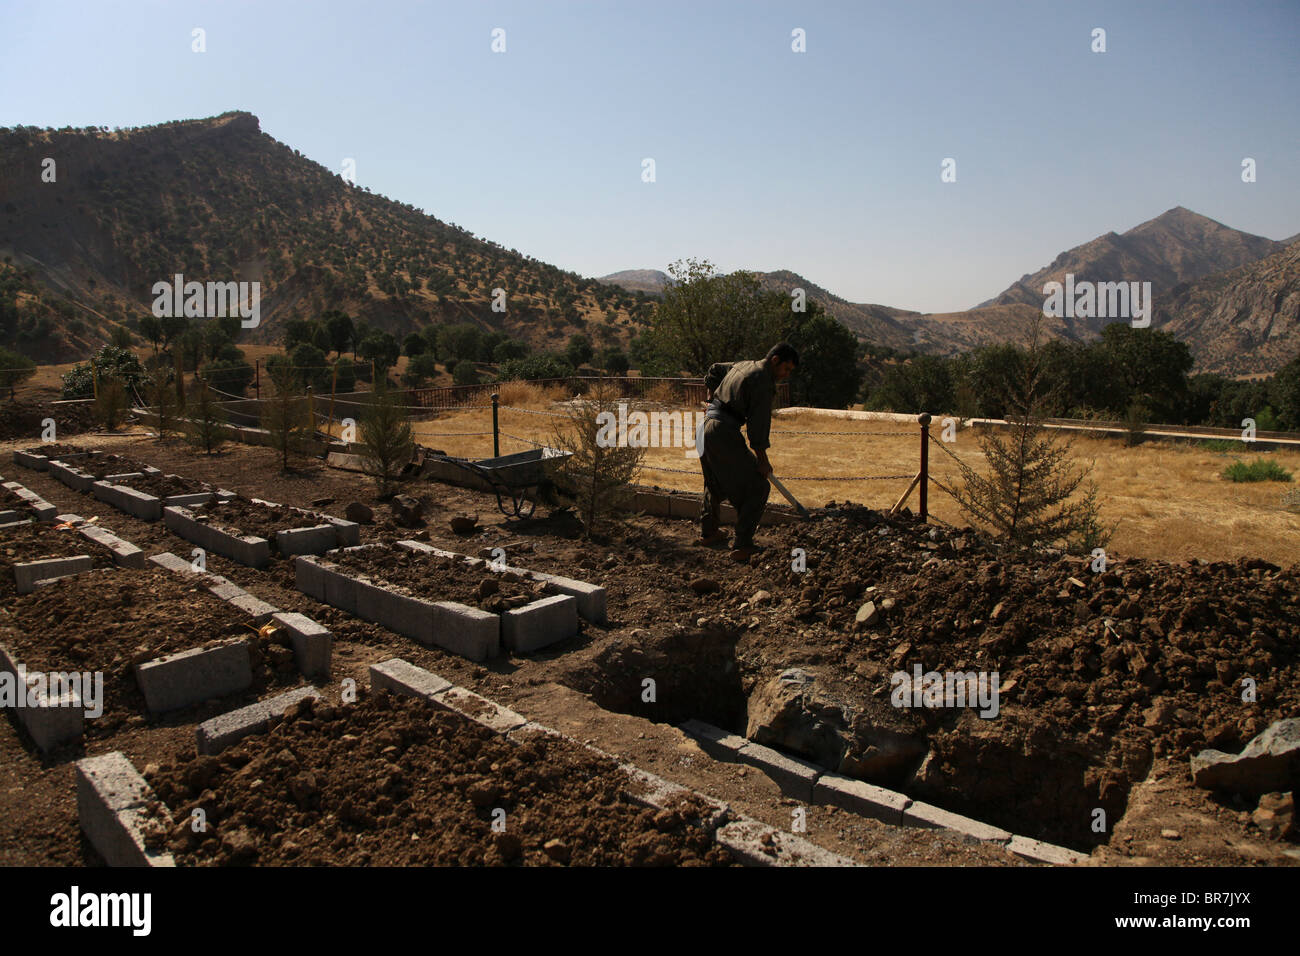 A HPG Kurdish fighter digging up a grave in Mehmet Karasungur Cemetery which is burial site for fallen Kurdish fighters of the People's Defense Forces HPG the military wing of the Kurdistan Workers' Party PKK located in the Qandil Mountains a mountainous area of Iraqi Kurdistan near the Iraq Iran border Stock Photo